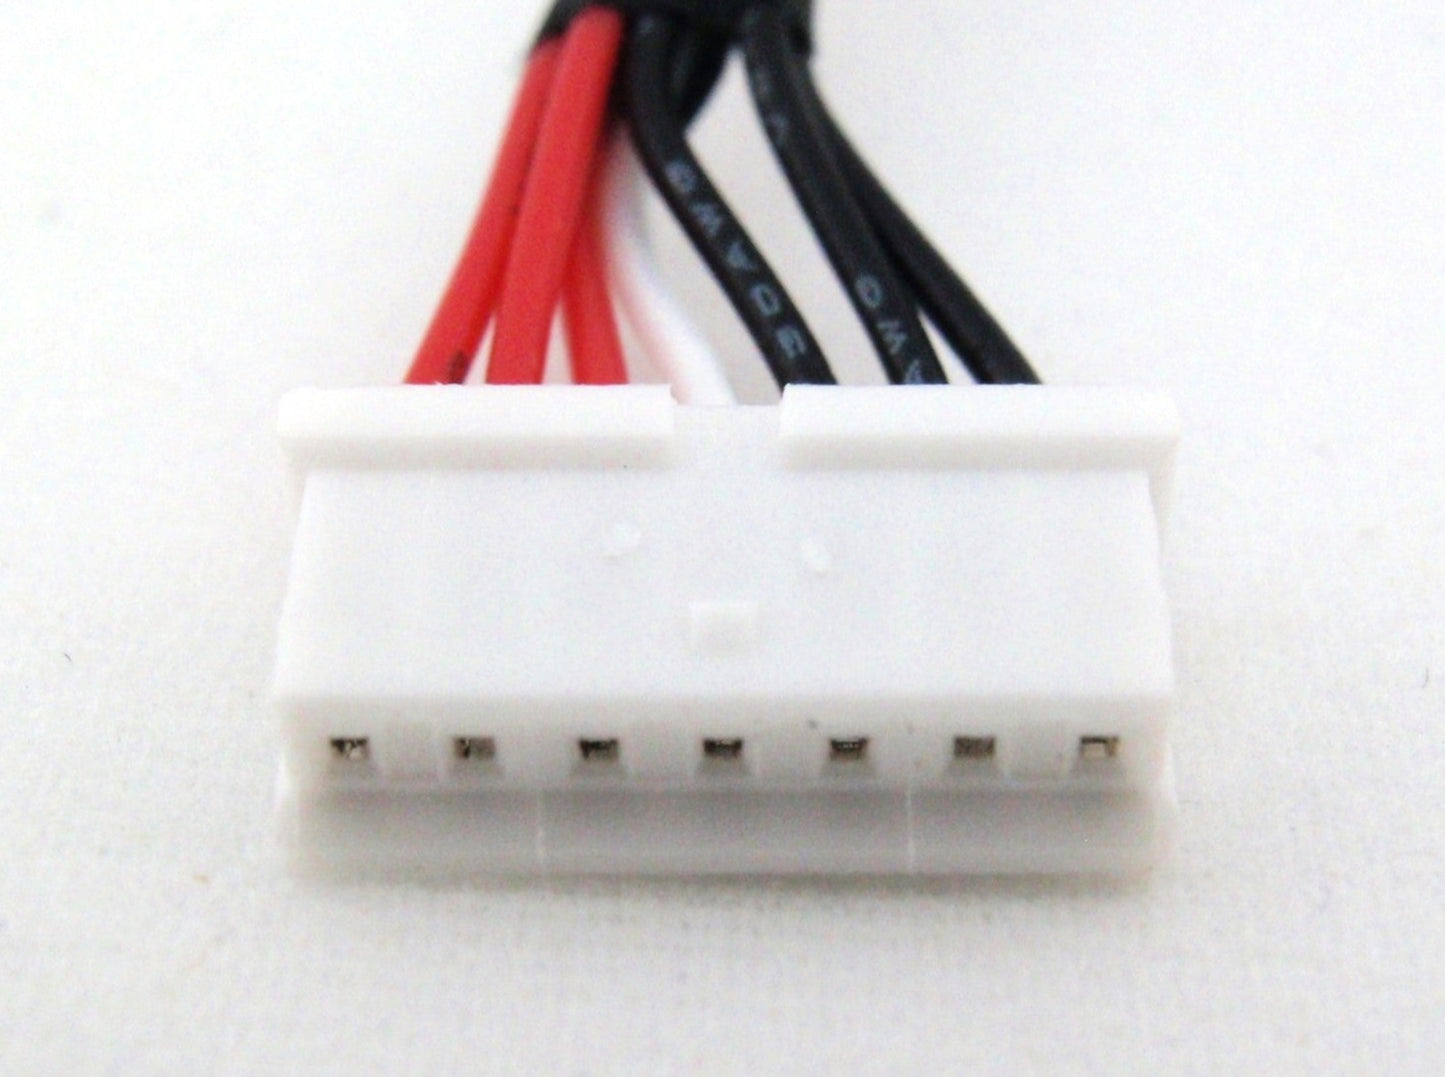 Dell New DC In Power Jack Charging Port Cable 0NKKV9 Inspiron 14 7466 7467 DC30100YA00 DC30100YB00 DC30100YY00 NKKV9